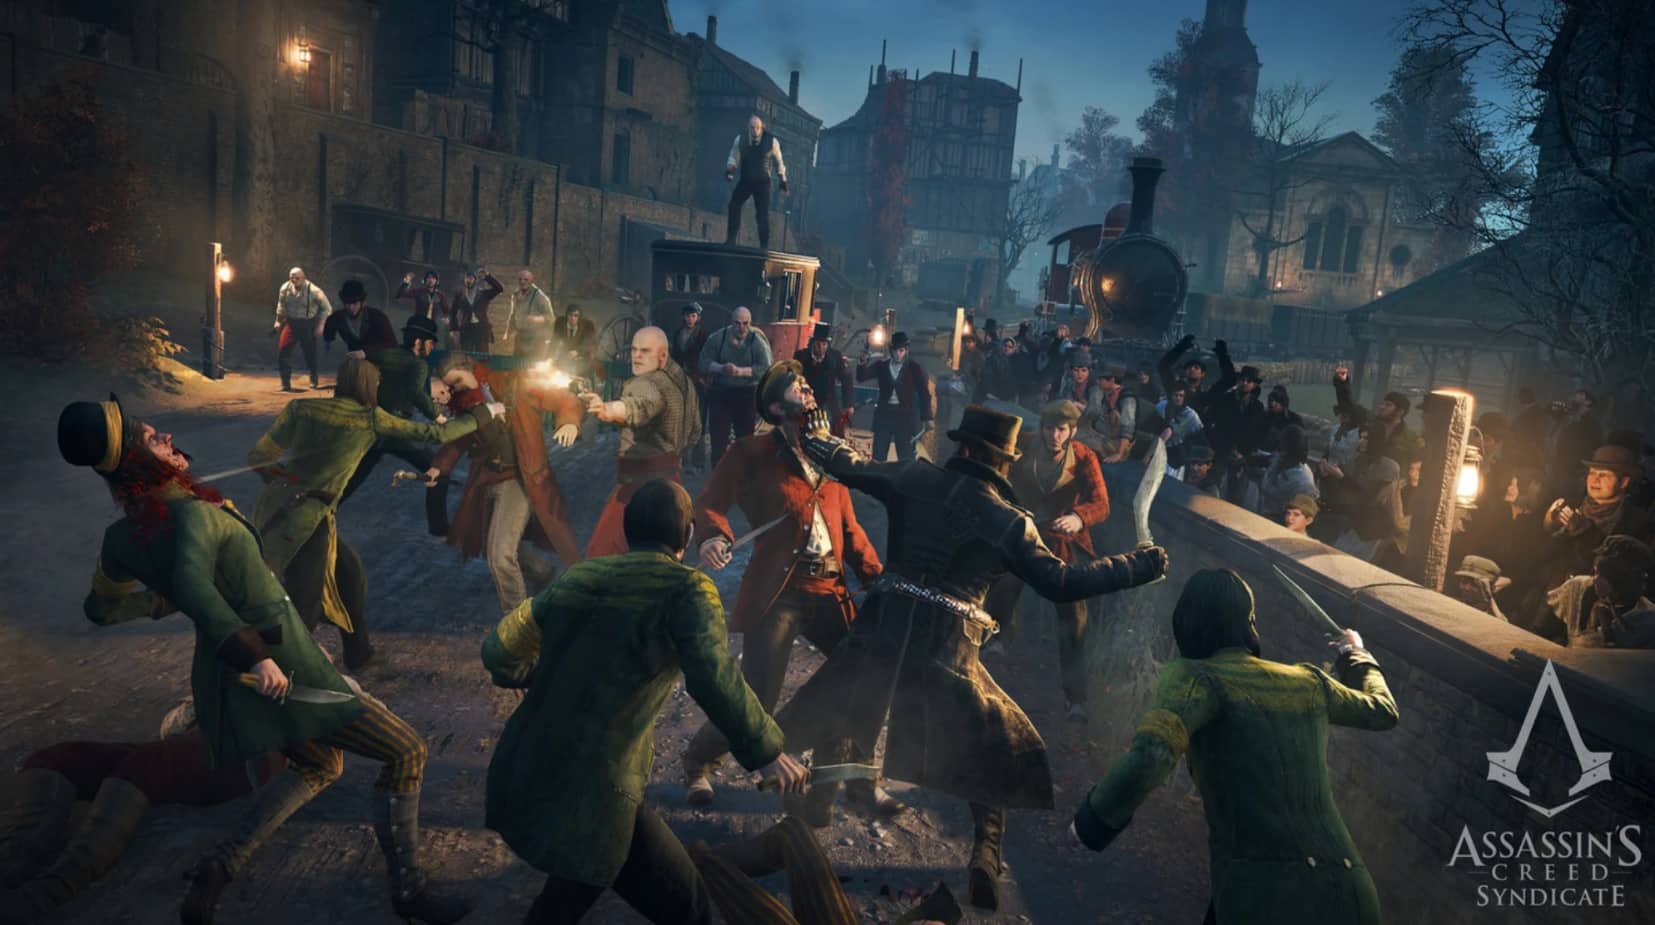 Creed Syndicate perfect difficulty, make it easy or hard emergent gameplay Ubisoft Assassin's Creed Syndicate